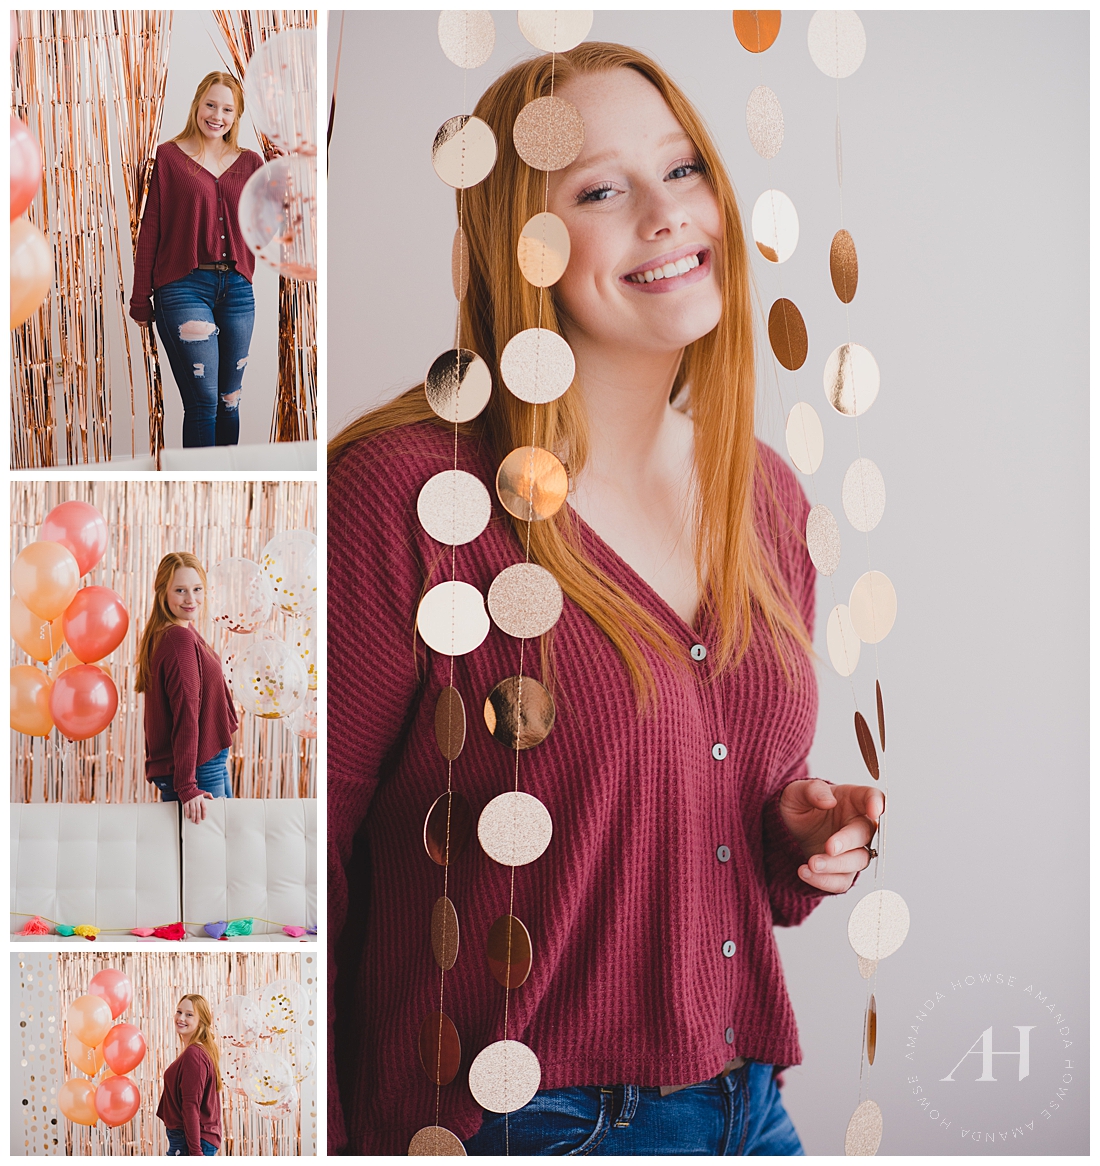 Playful Valentine's Day Portraits with Fun Backdrop and Balloons | Photographed by Tacoma Senior Photographer Amanda Howse